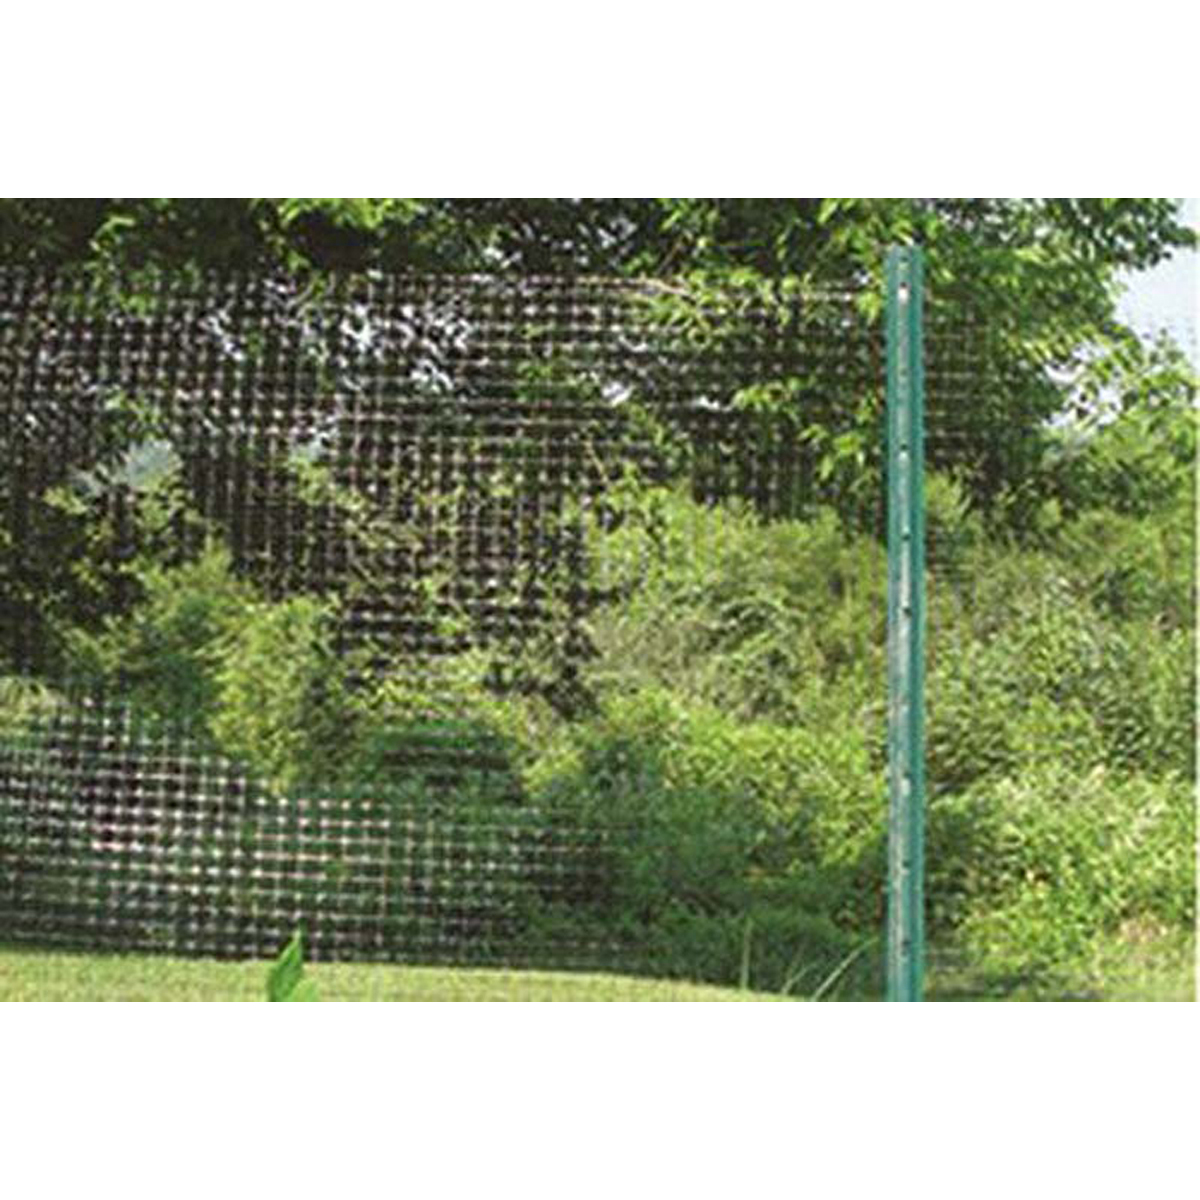 Image Thumbnail for Deer Fence 7' x 100' Retail Pro Grade